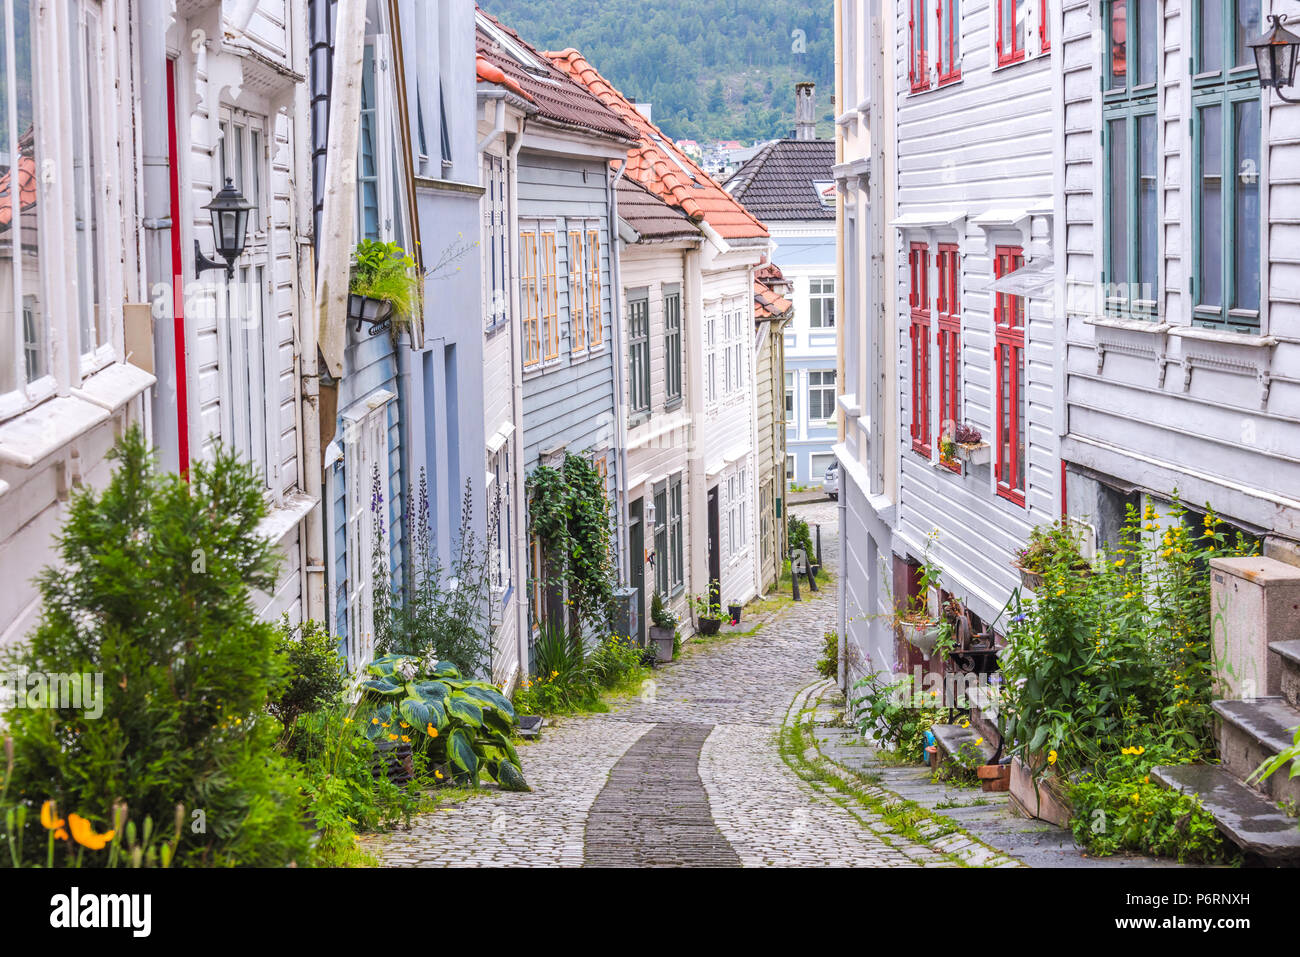 lane in the old town of Bergen with wooden houses, Norway, Knosesmauet street Stock Photo